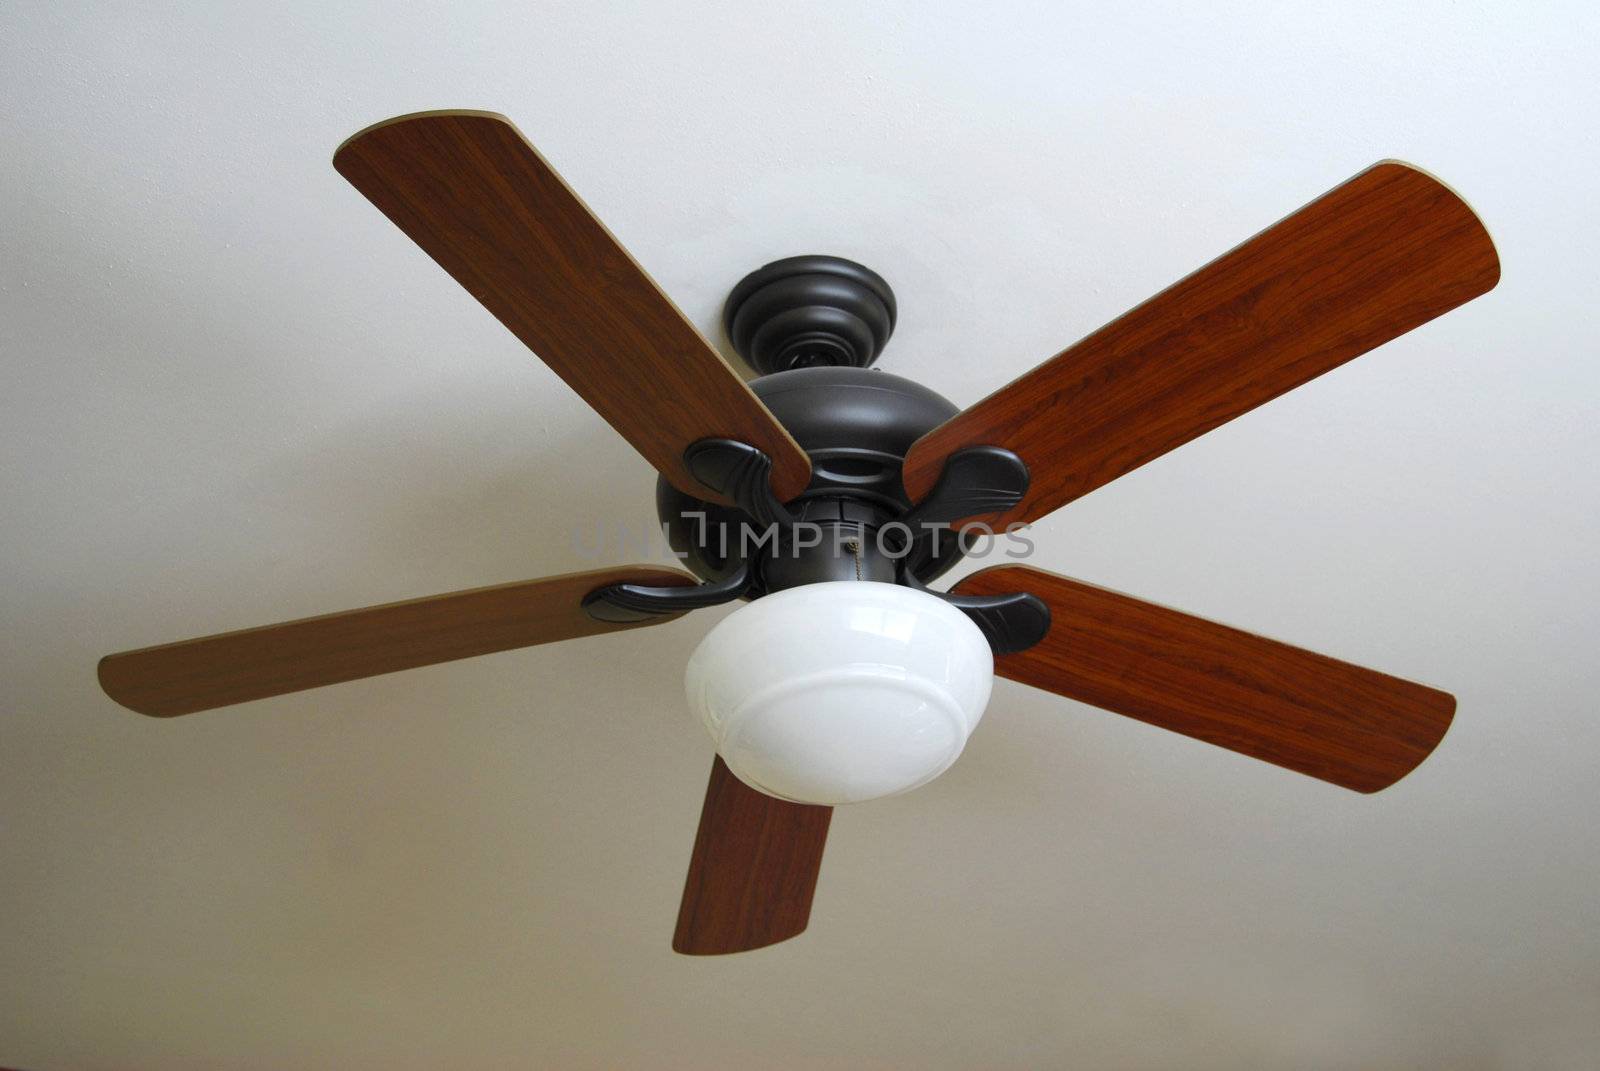 A modern ceiling fan, installed on a textured white ceiling.